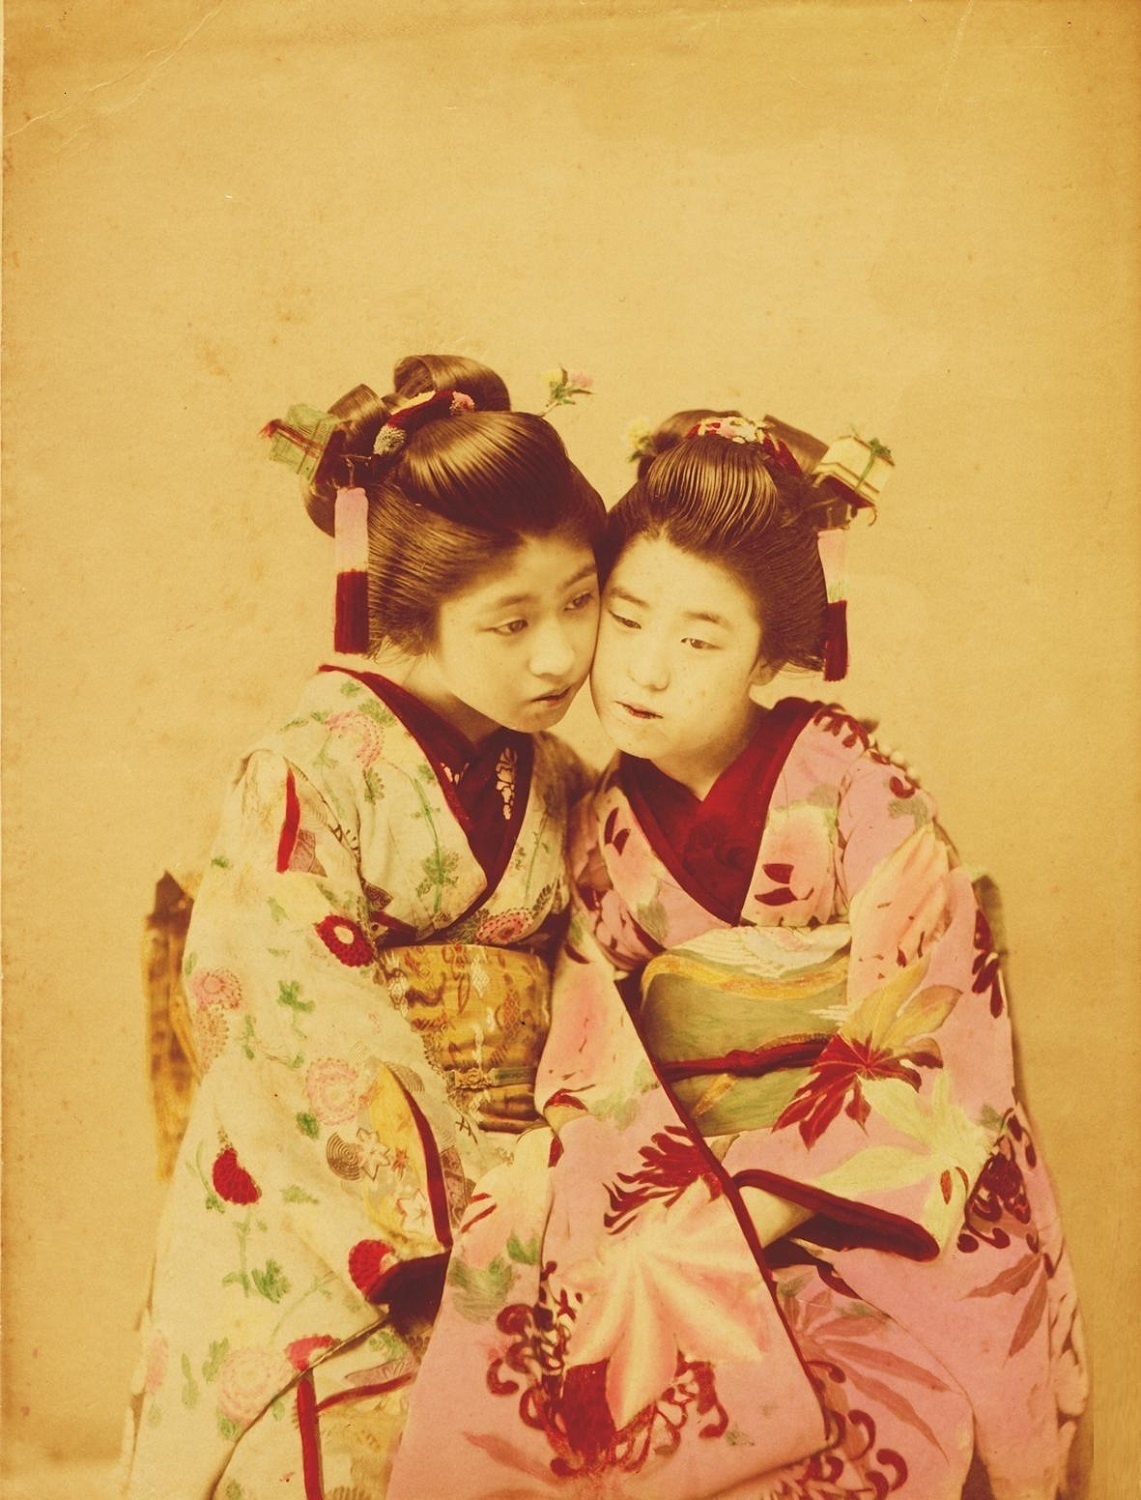 Japanese girls hanging out in beautiful kimonos in 1887.